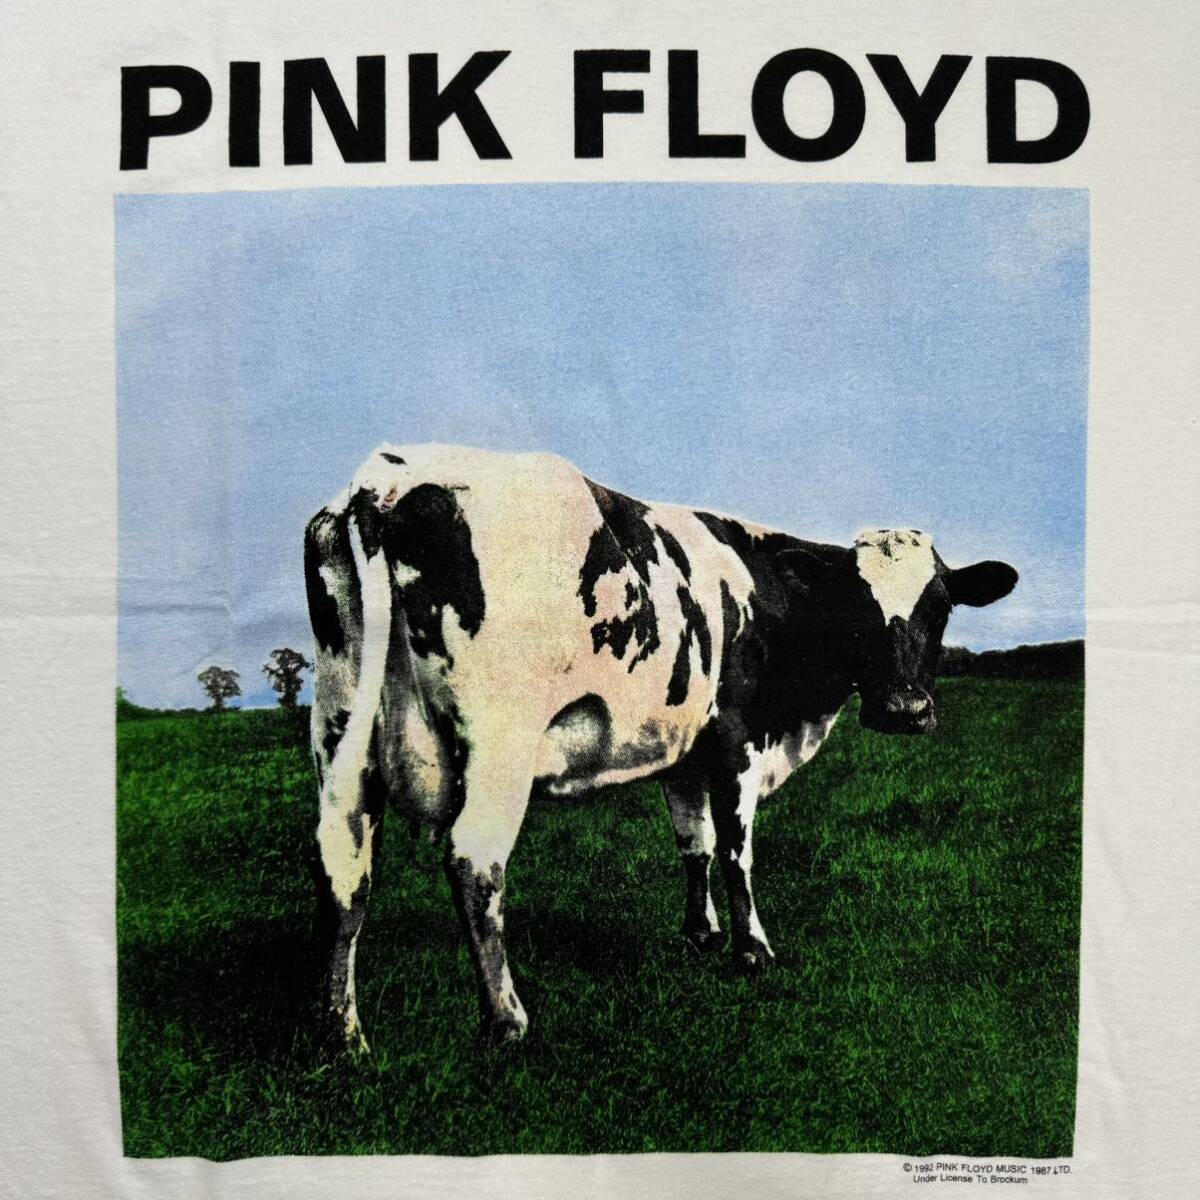 PINK FLOYD STILL FIRST IN SPACE ATOM HEART MOTHER ピンクフロイド tee Tシャツ_画像2